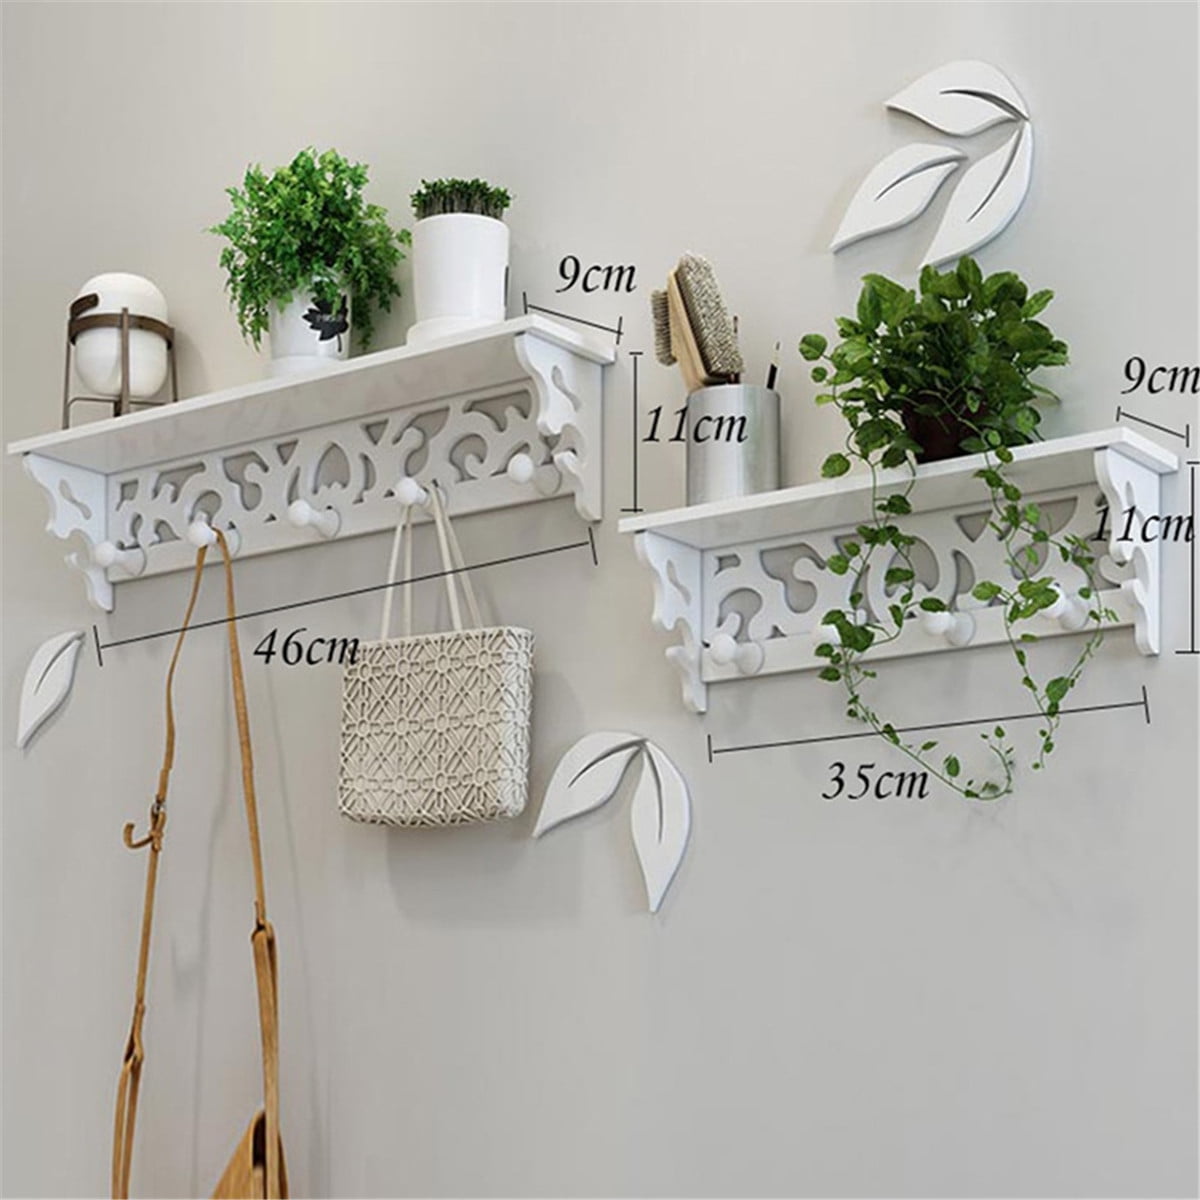 2 Pack Rustic Coat Rack Wall Mounted with 5 Coat Hooks, White Wall Mounted Coat Rack, Entryway